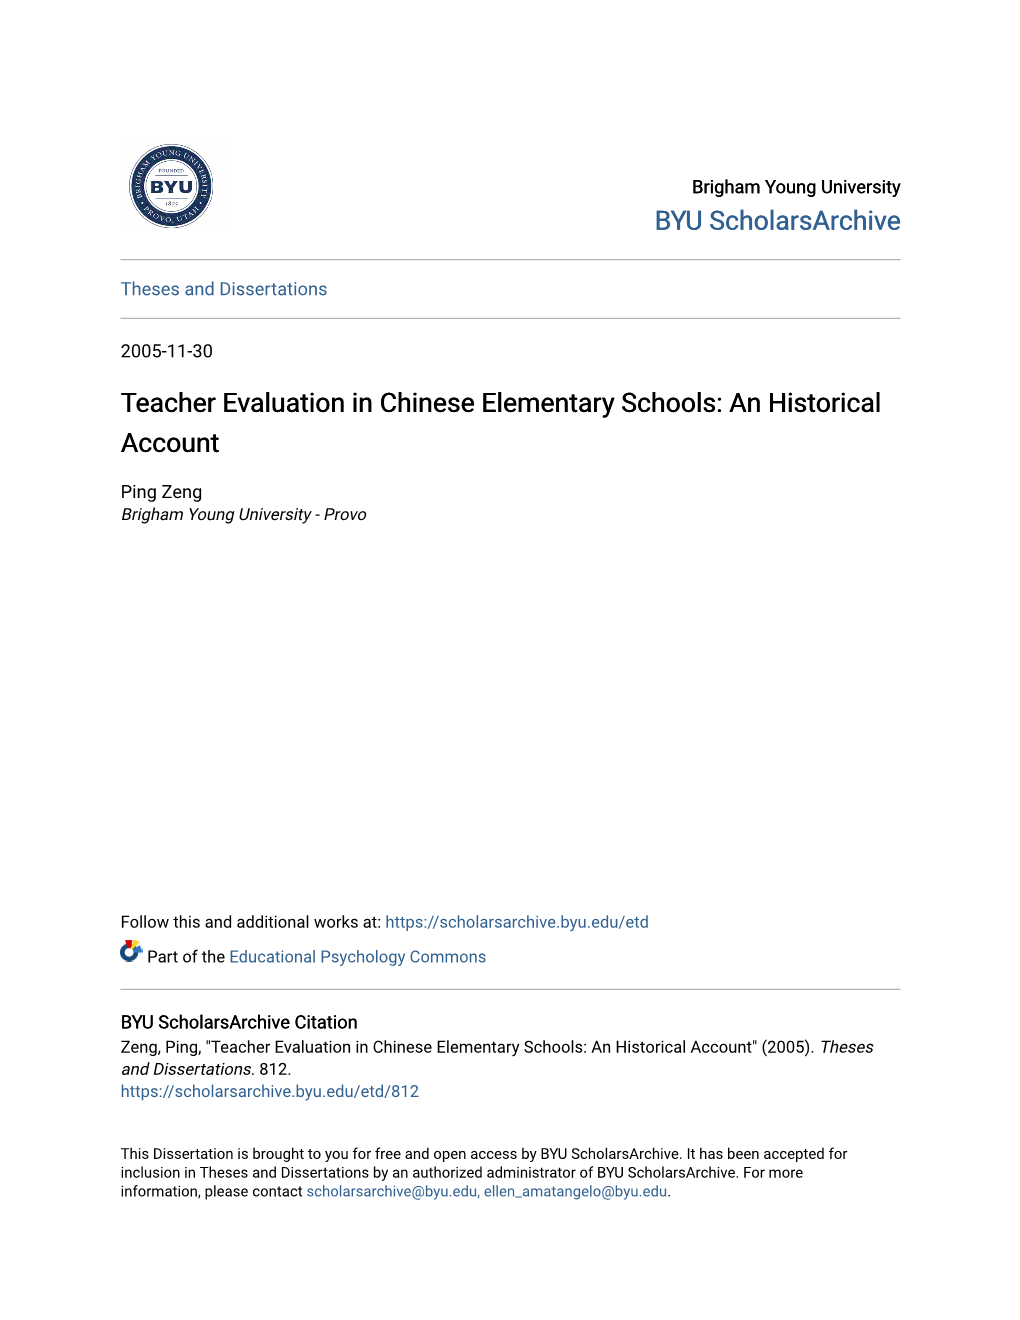 Teacher Evaluation in Chinese Elementary Schools: an Historical Account